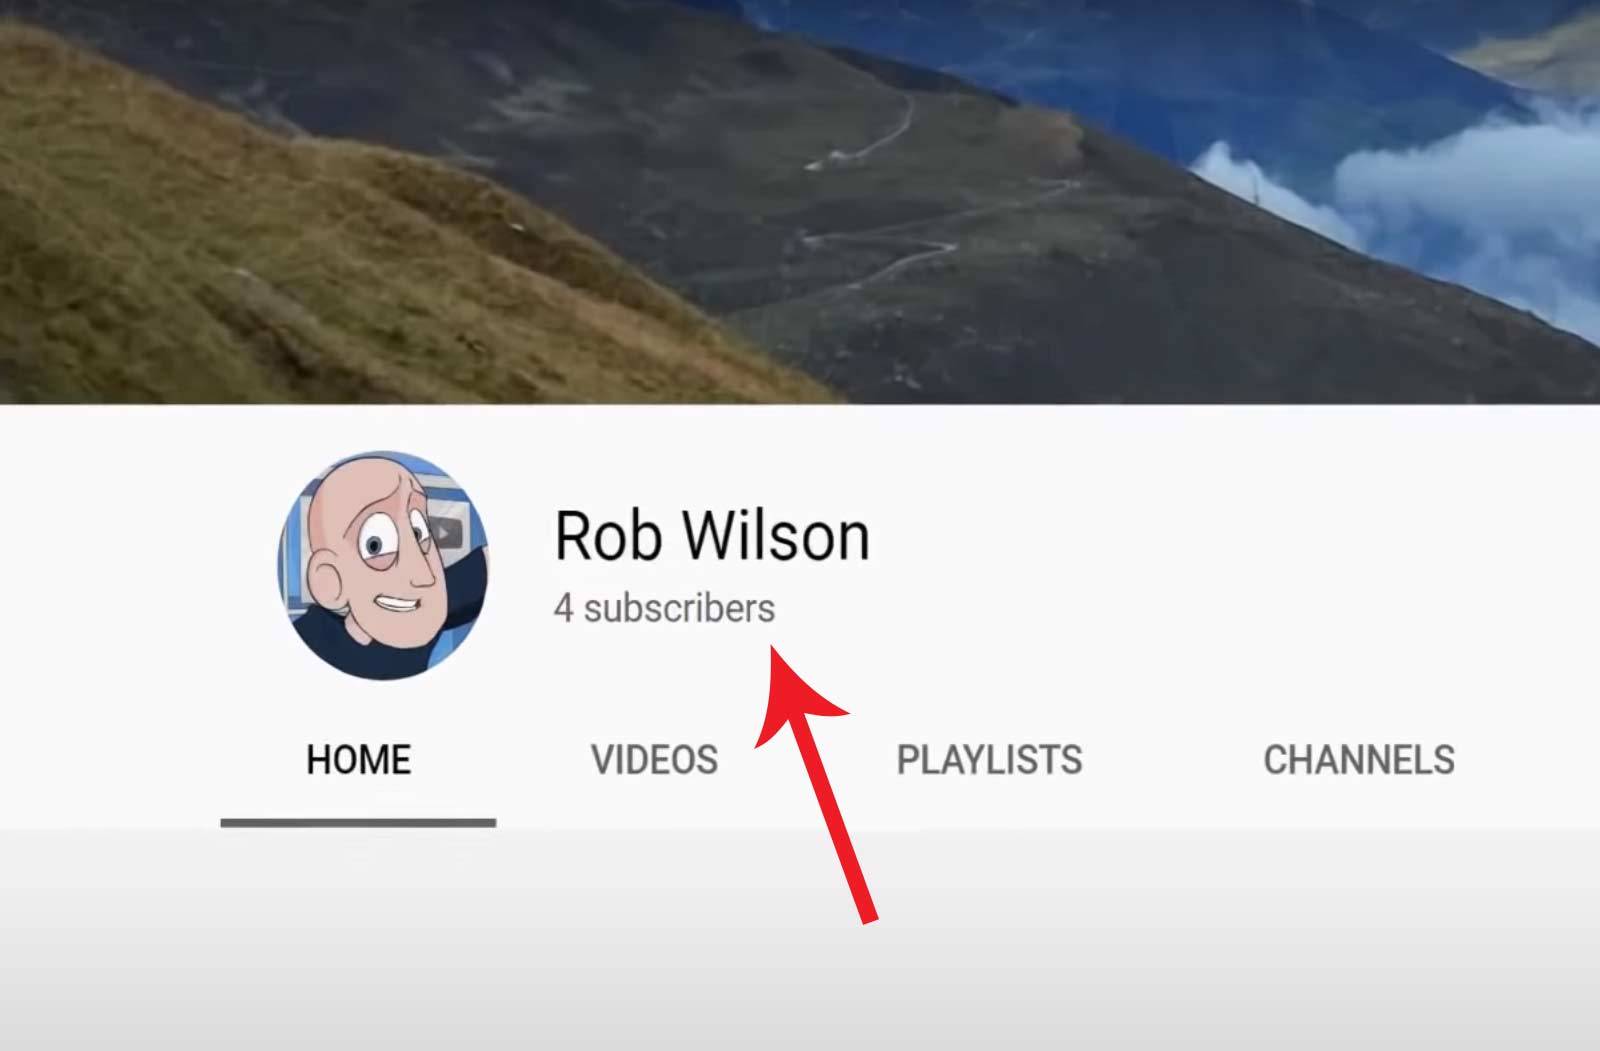 Studio adds a real-time subscriber count on desktop